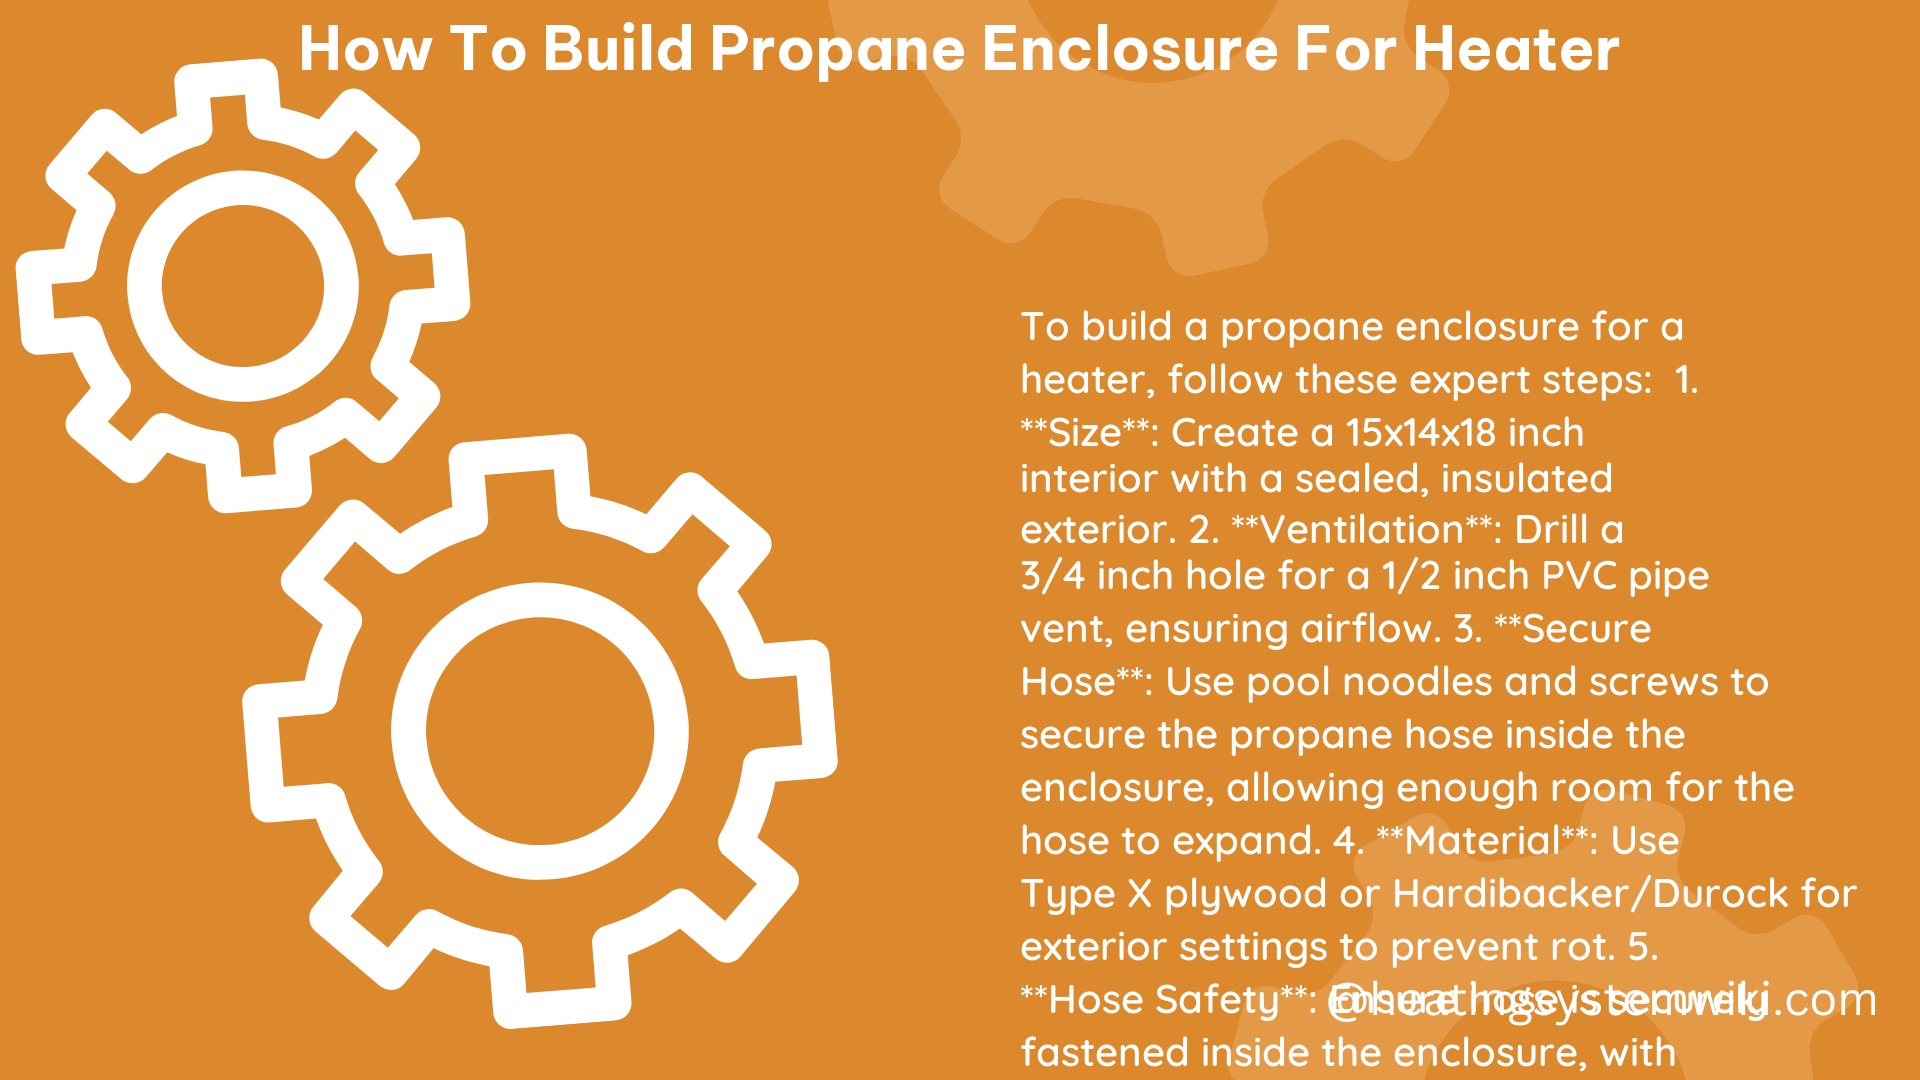 how to build propane enclosure for heater